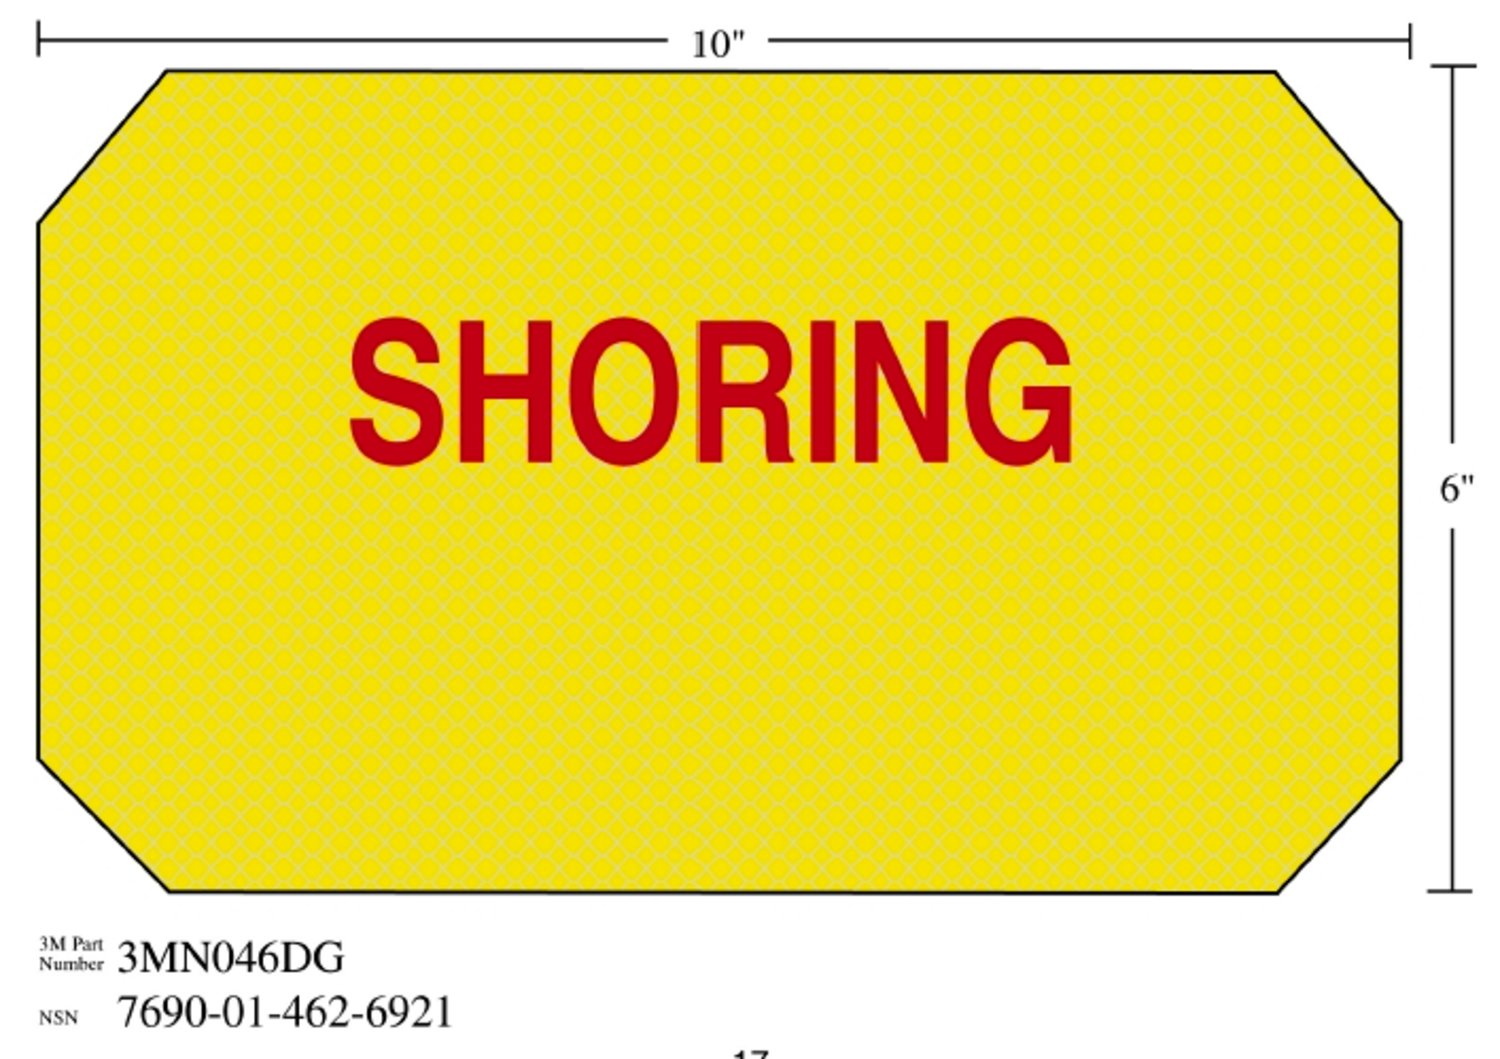 7010388684 - 3M Diamond Grade Damage Control Sign 3MN046DG, "SHORING", 10 in x 6
in, 10/Package